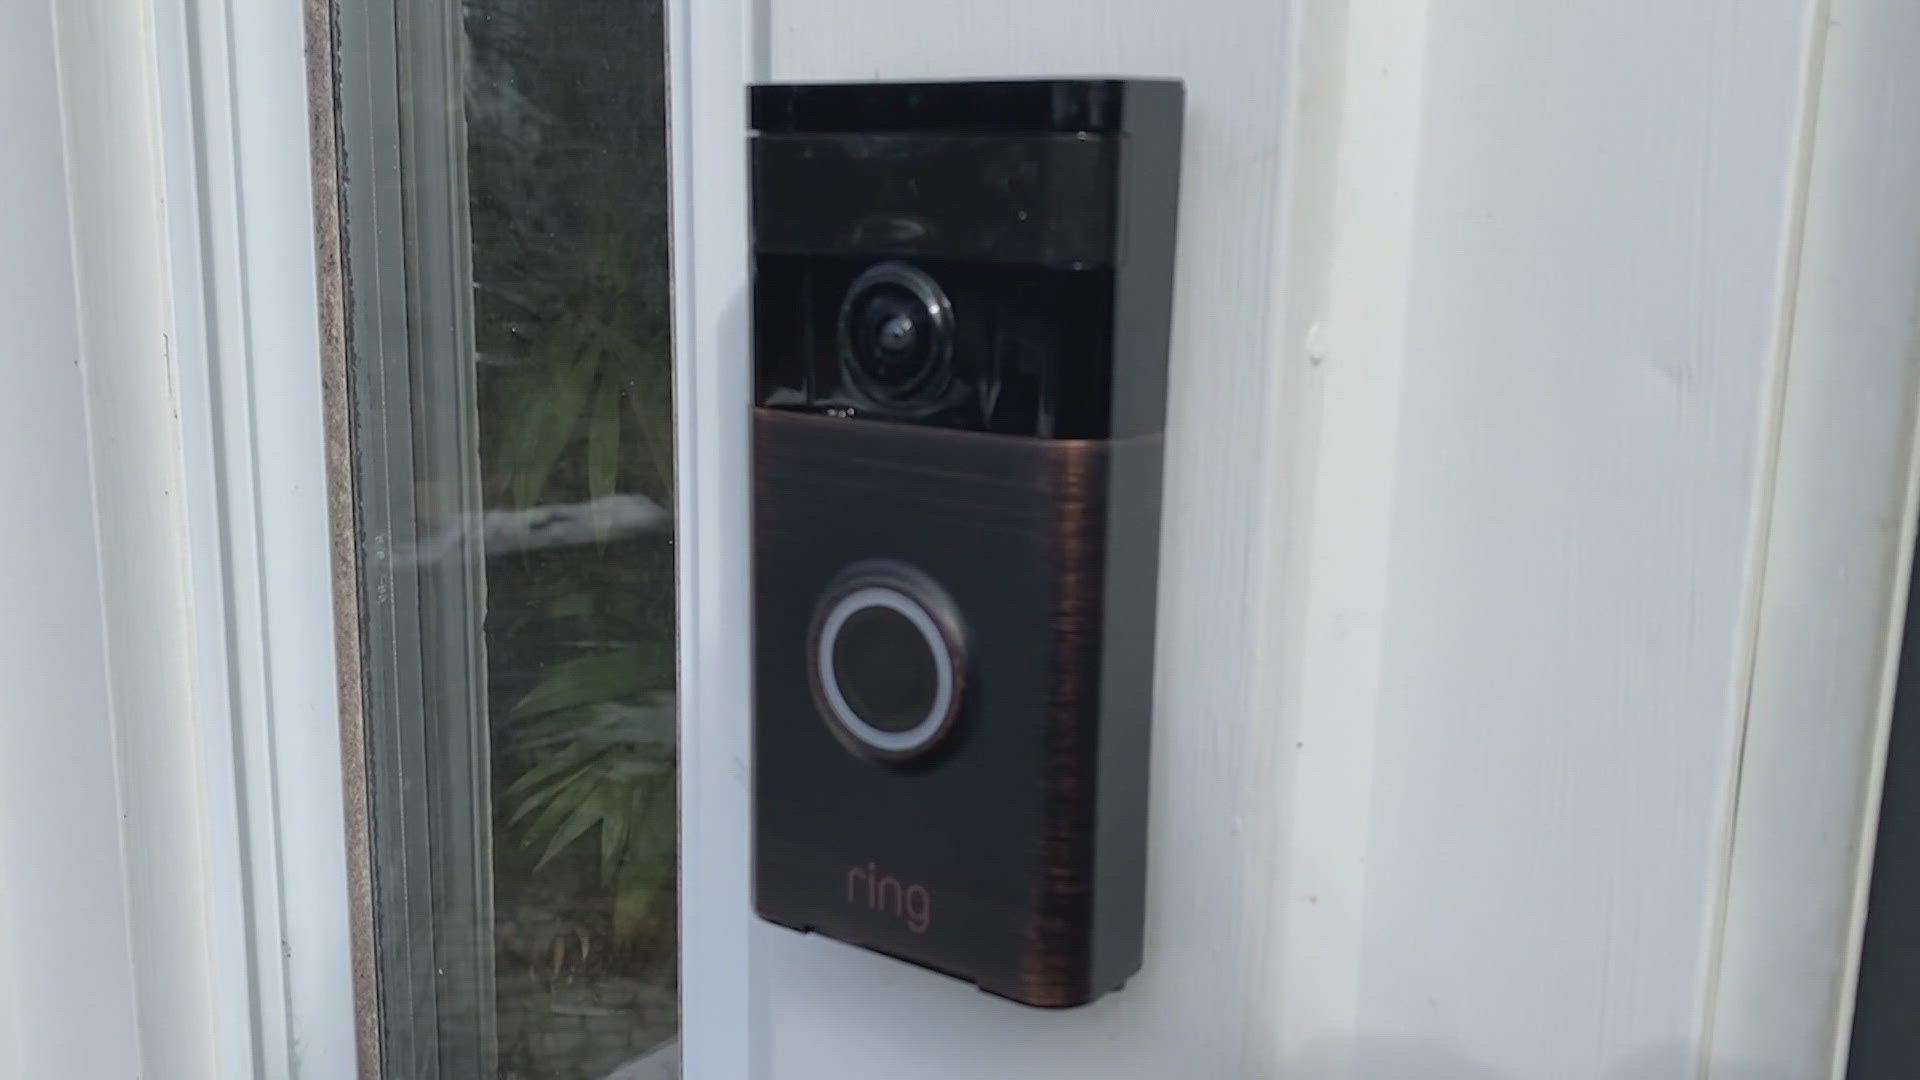 The city of Akron is expanding its free Ring doorbell program to all residents after launching a pilot program last summer.